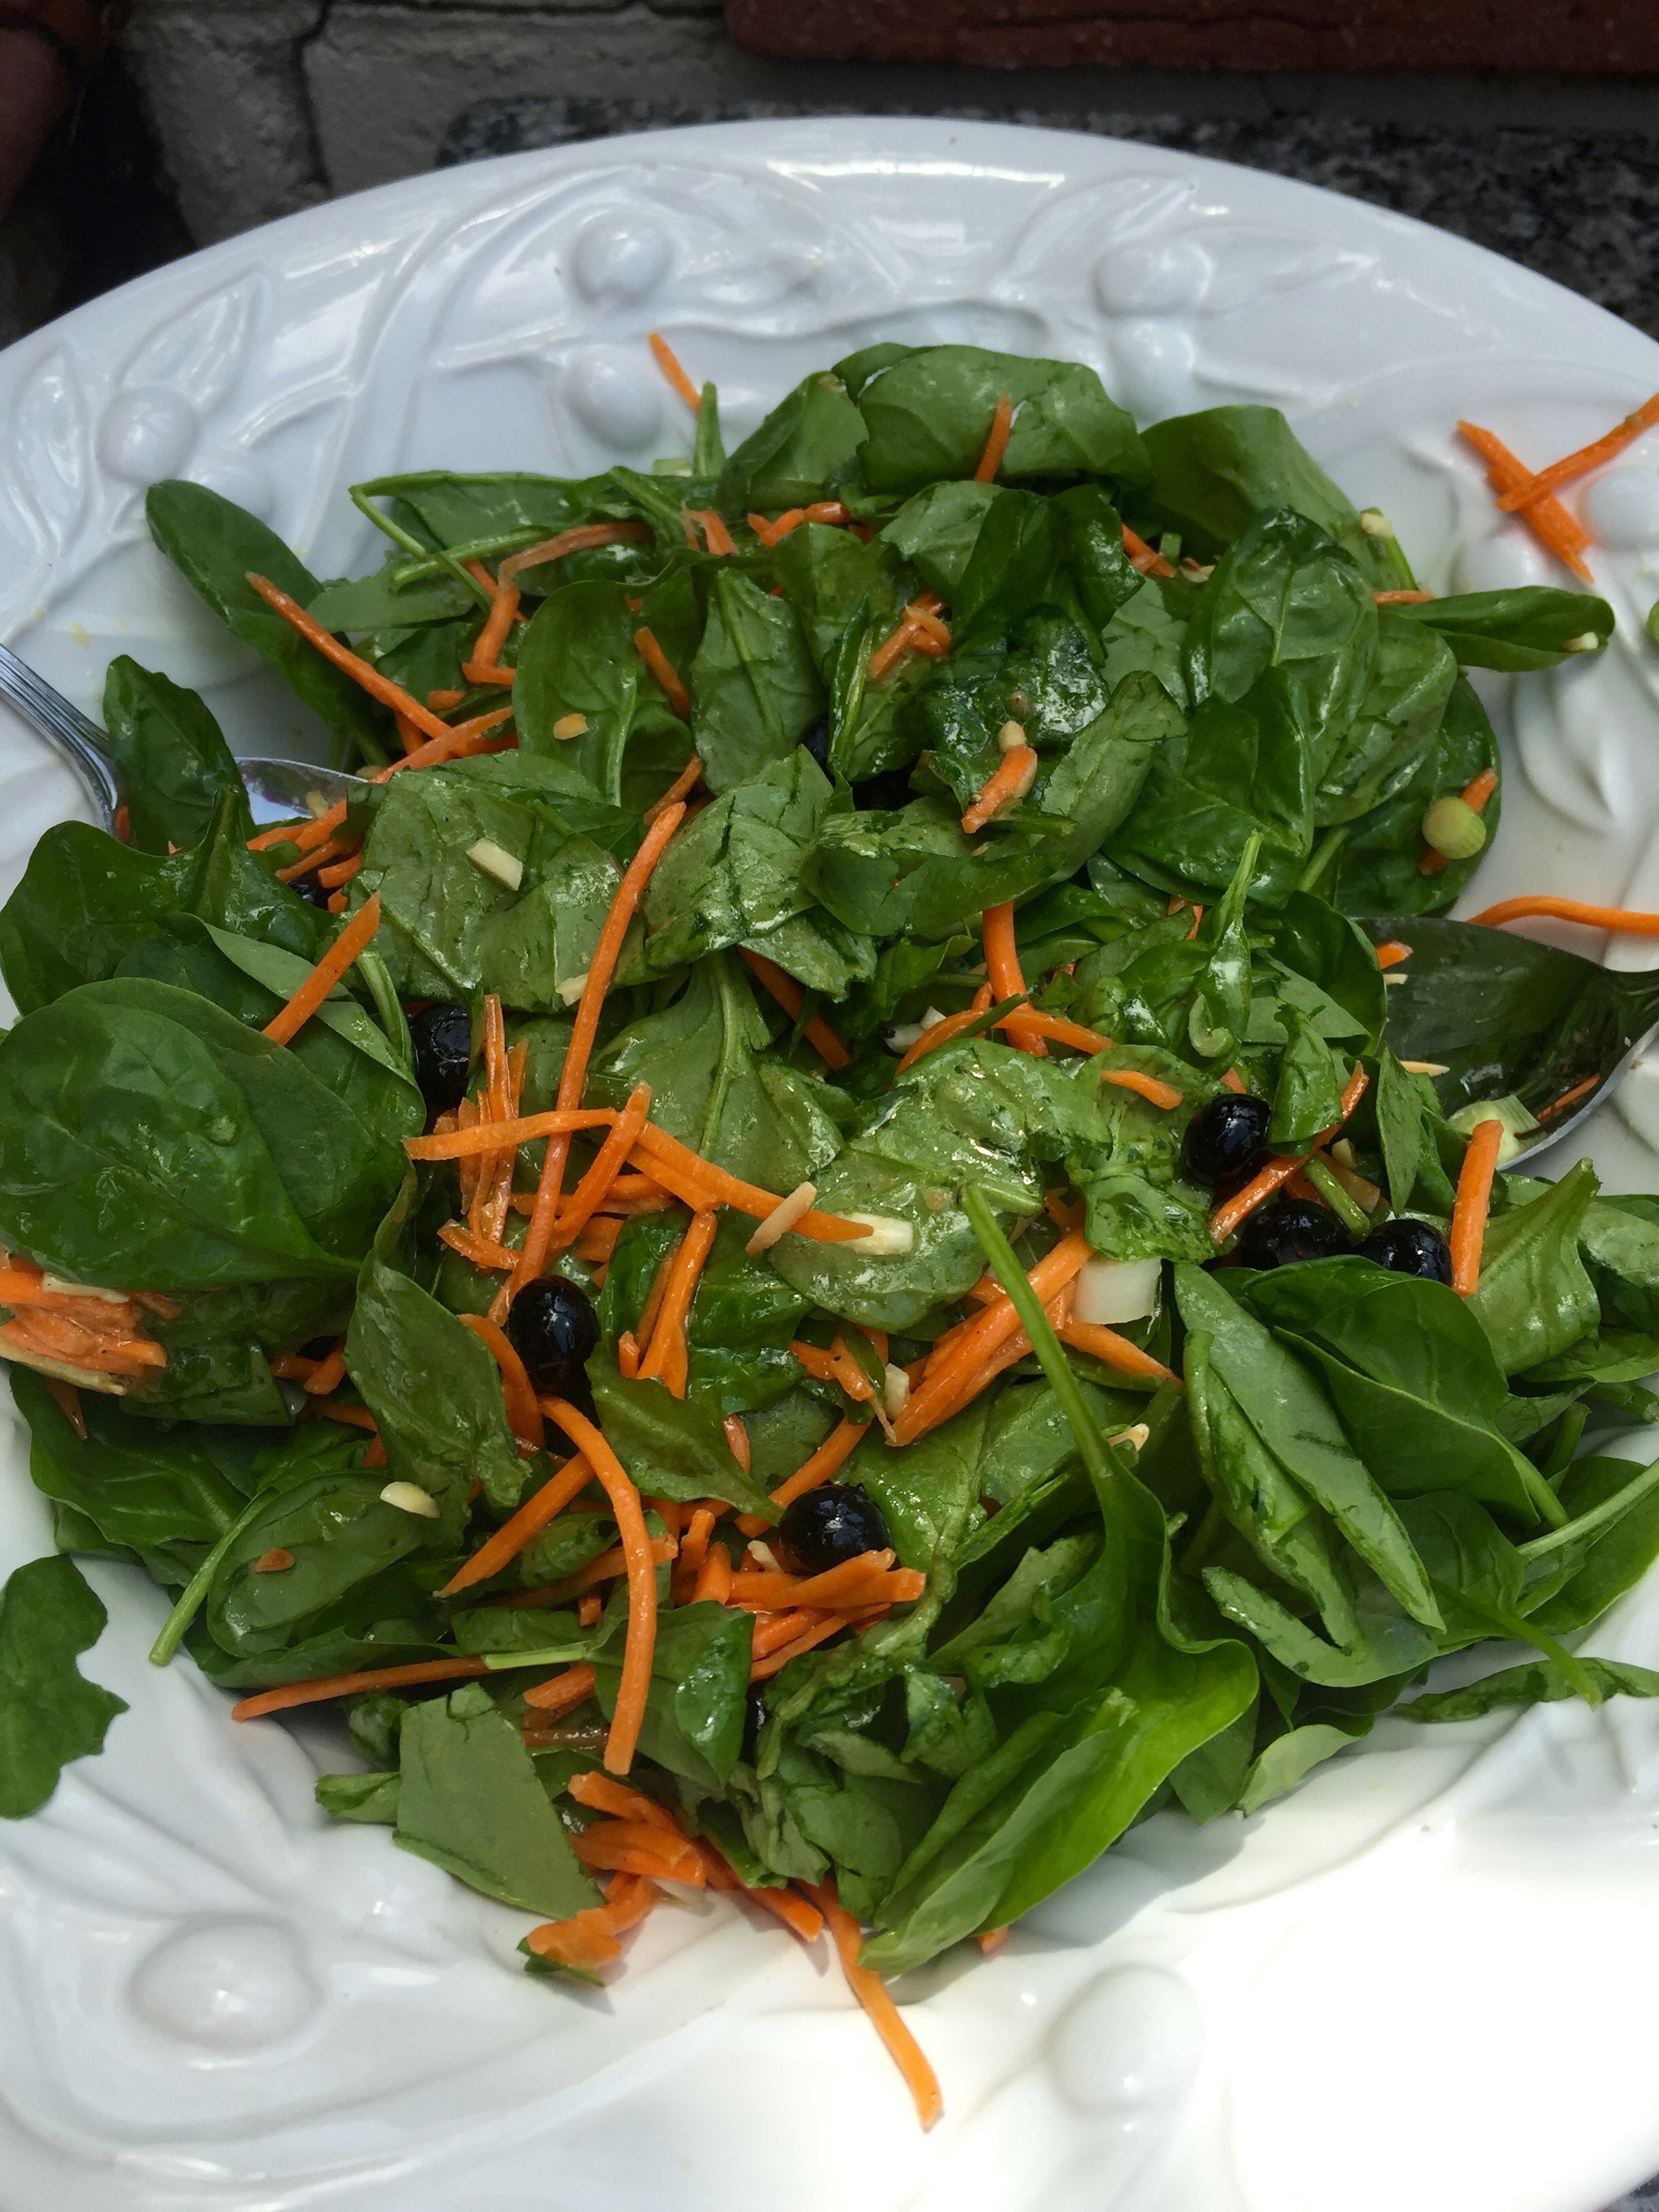 Salad doesn't have to be boring, try Blueberry, Carrot, Almond & Spinach Salad.